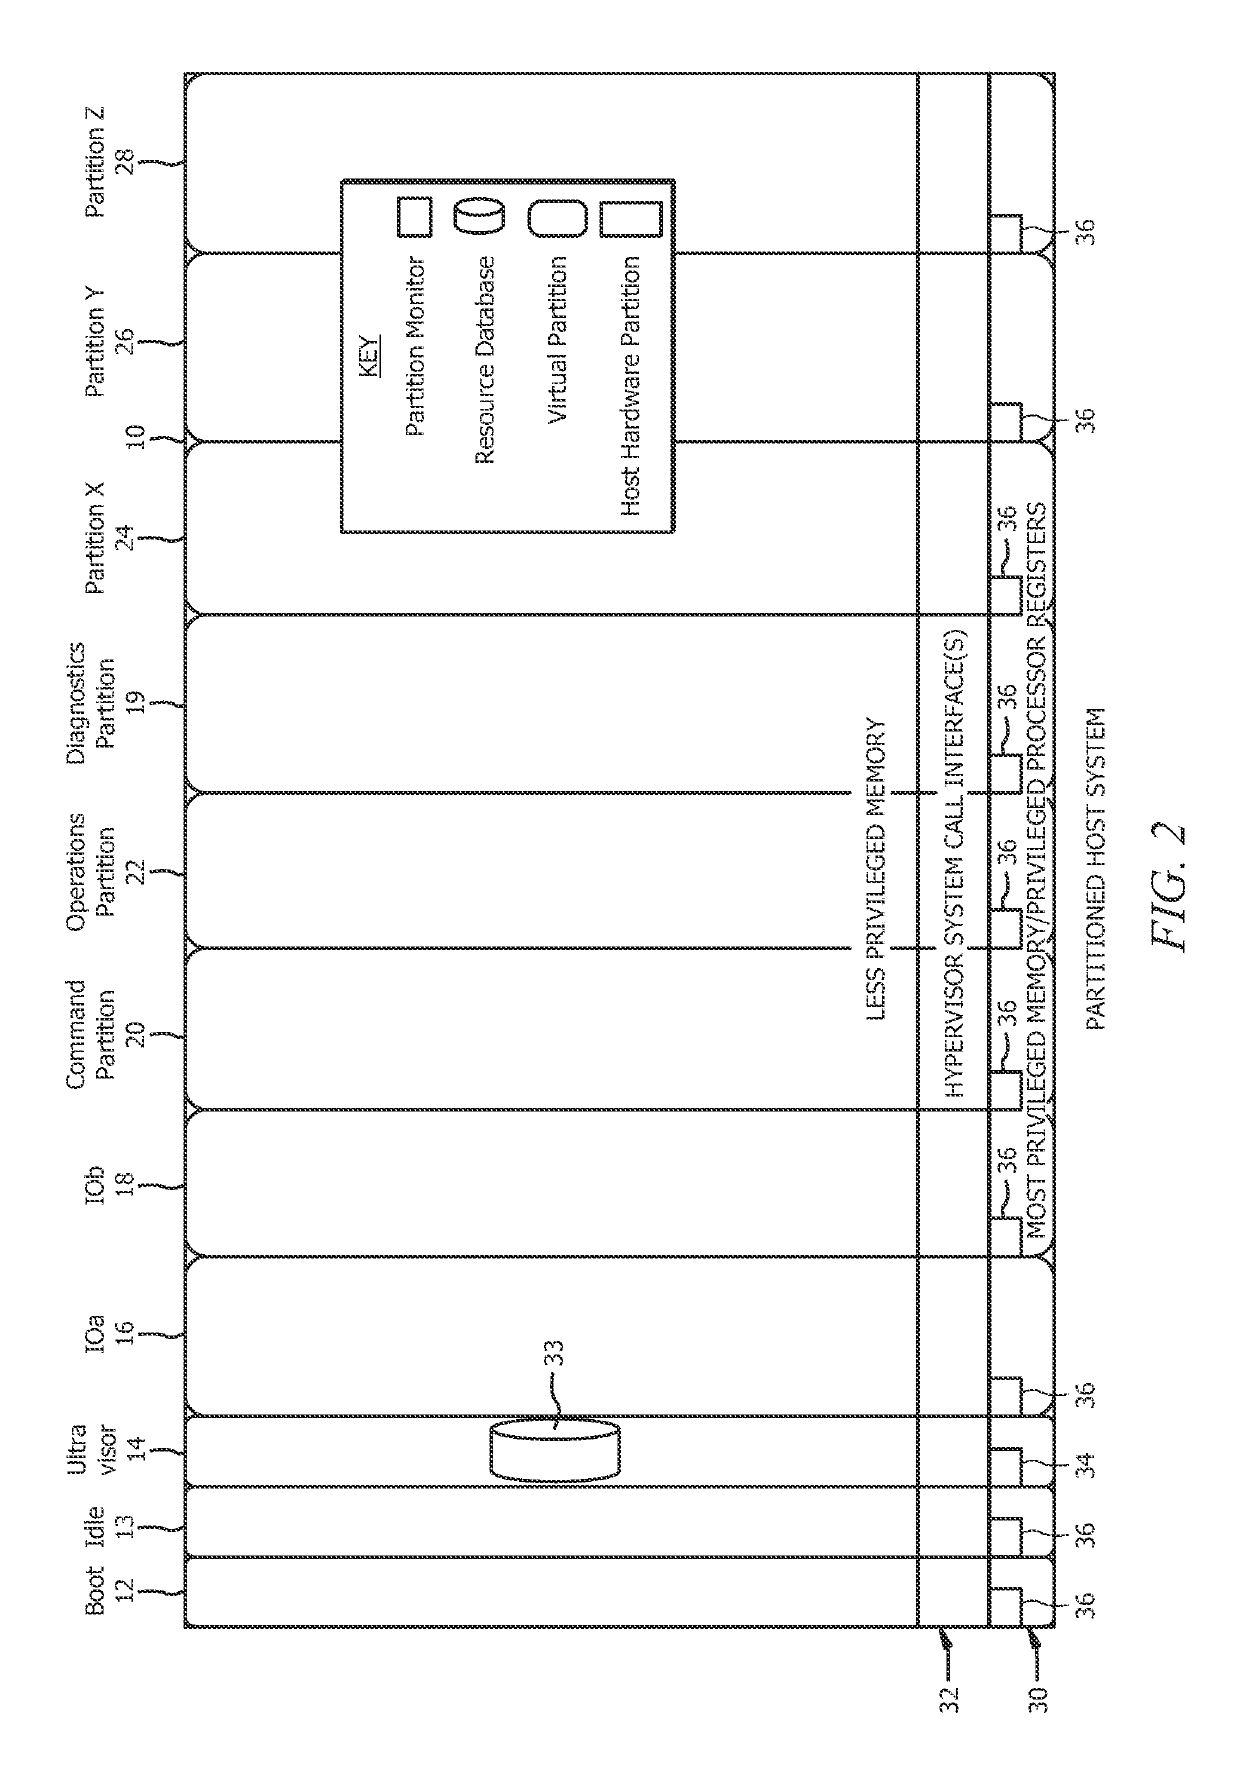 Fabric computing system having an embedded software defined network